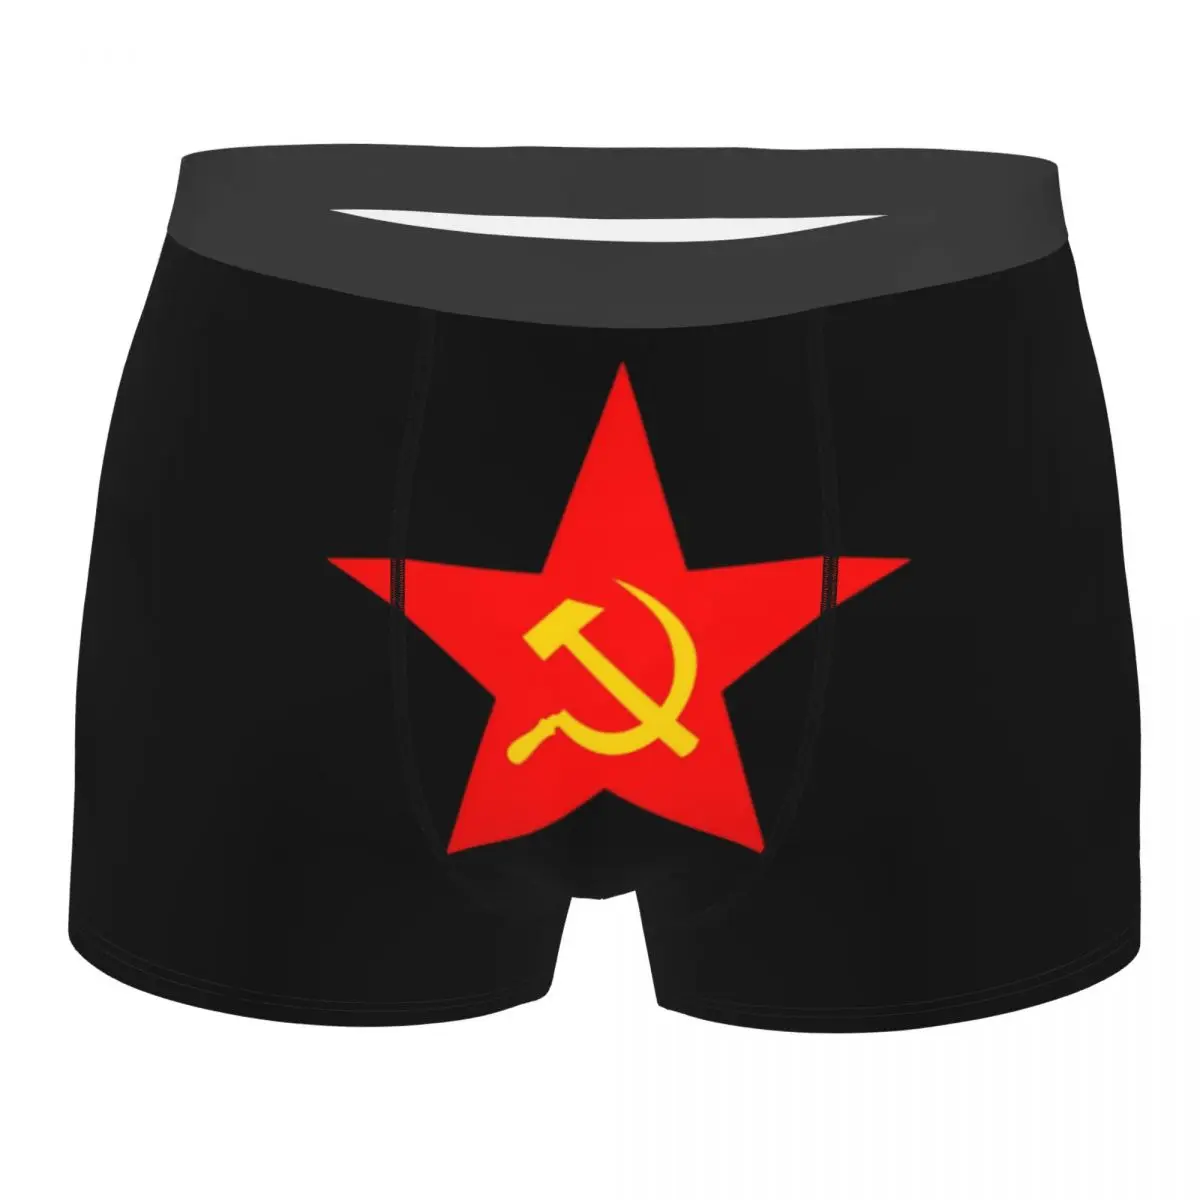 

Male Sexy Soviet Union Hammer Sickle Red Star Underwear Russian CCCP Flag Boxer Briefs Men Stretch Shorts Panties Underpants